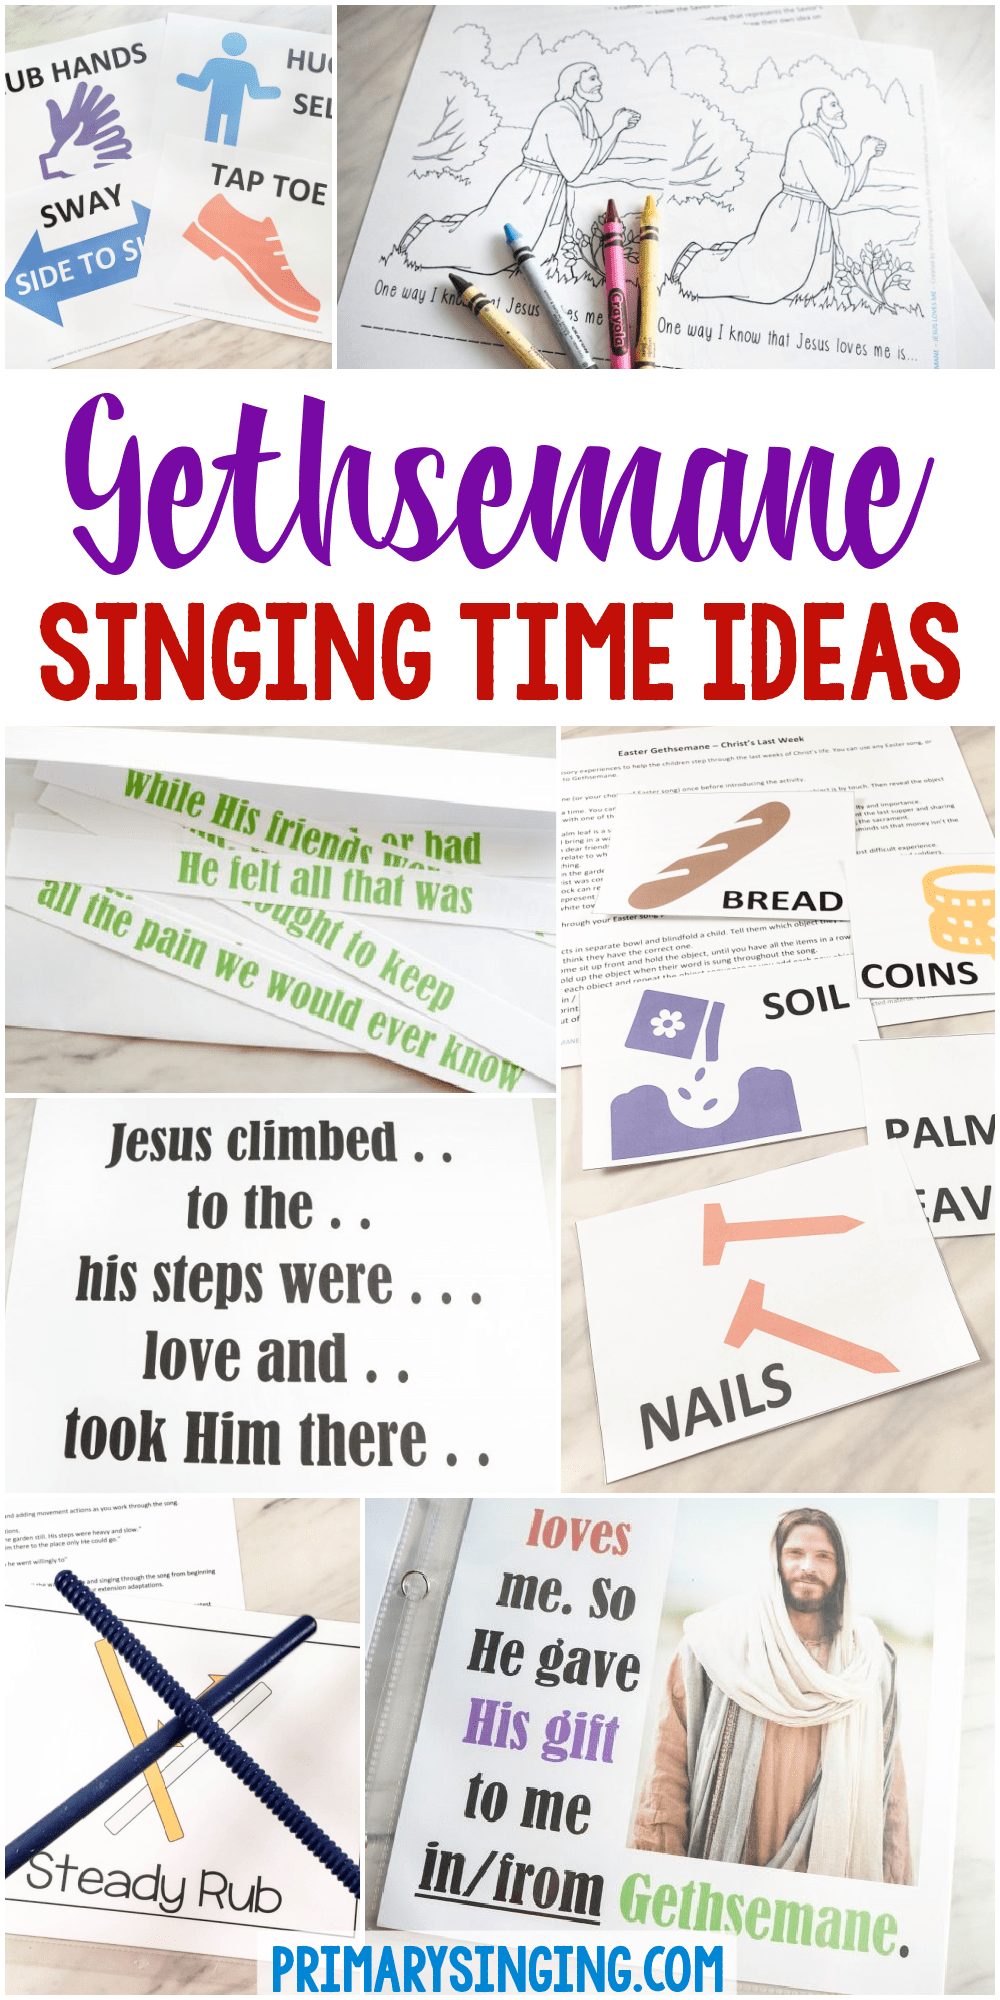 25 Gethsemane Singing Time Ideas - Easy ways to teach Gethsemane song for LDS Primary Music Leaders including printable song helps with a variety of learning styles. Links to videos, movement activities, living music, and even a book for teaching with purpose!